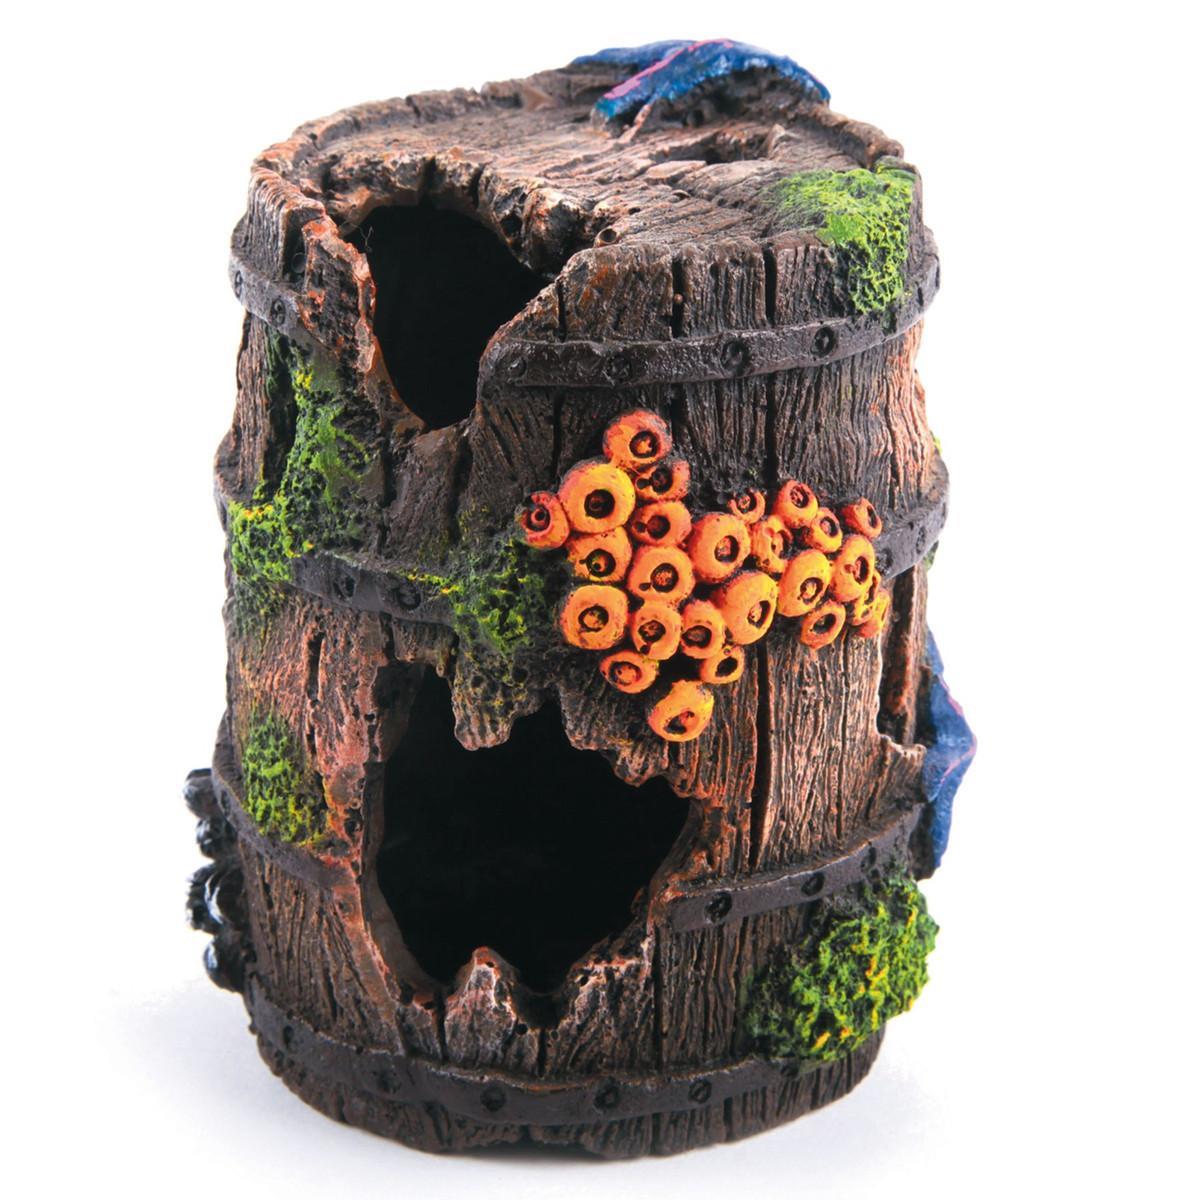 Kazoo Wooden Barrel with Overgrown Coral (18861)